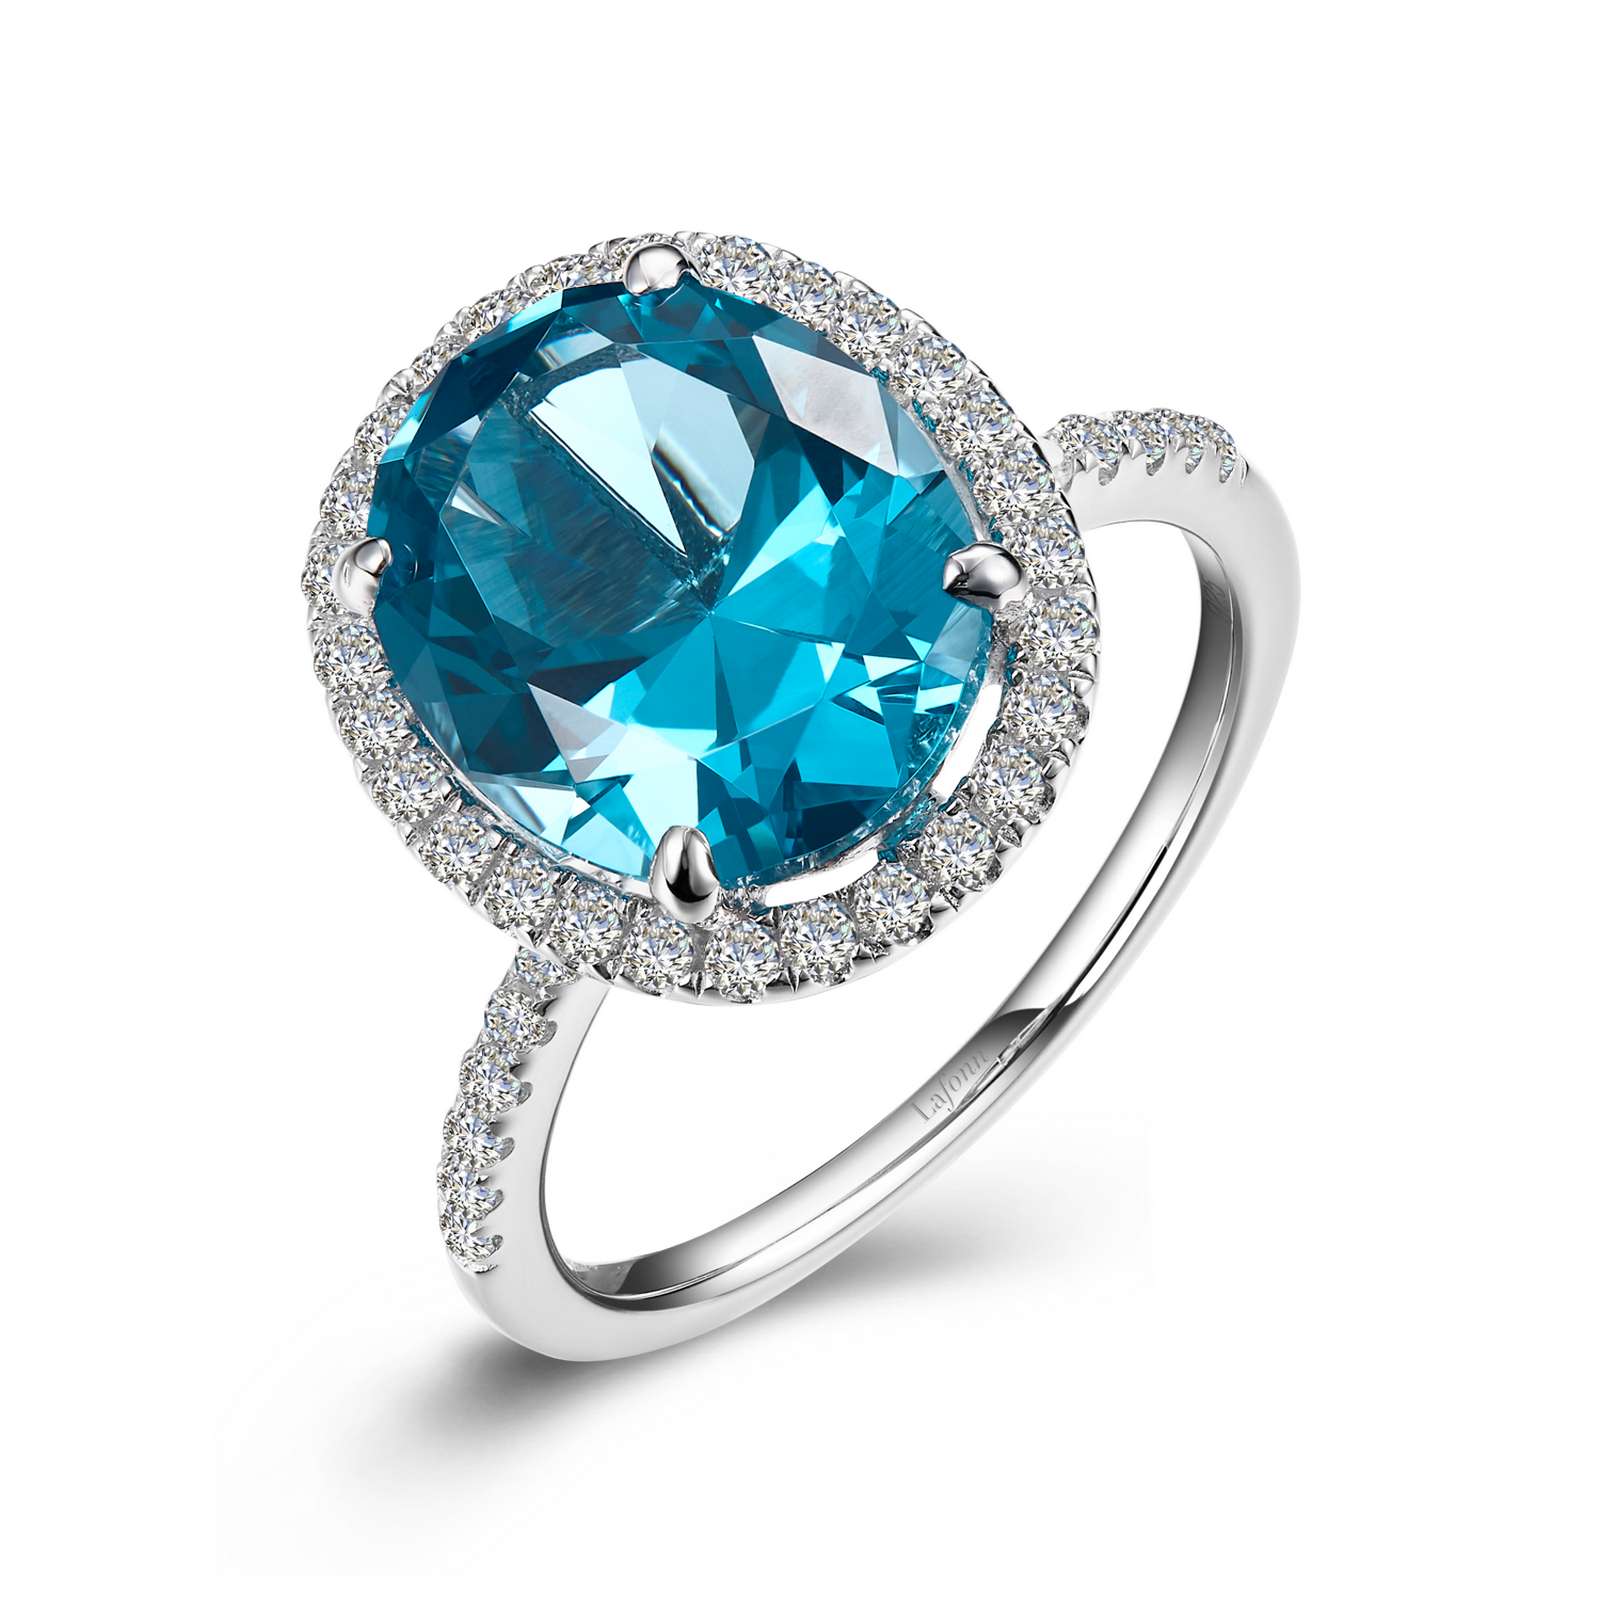 Classic Paraiba Tourmaline Platinum Bonded Ring Griner Jewelry Co. Moultrie, GA